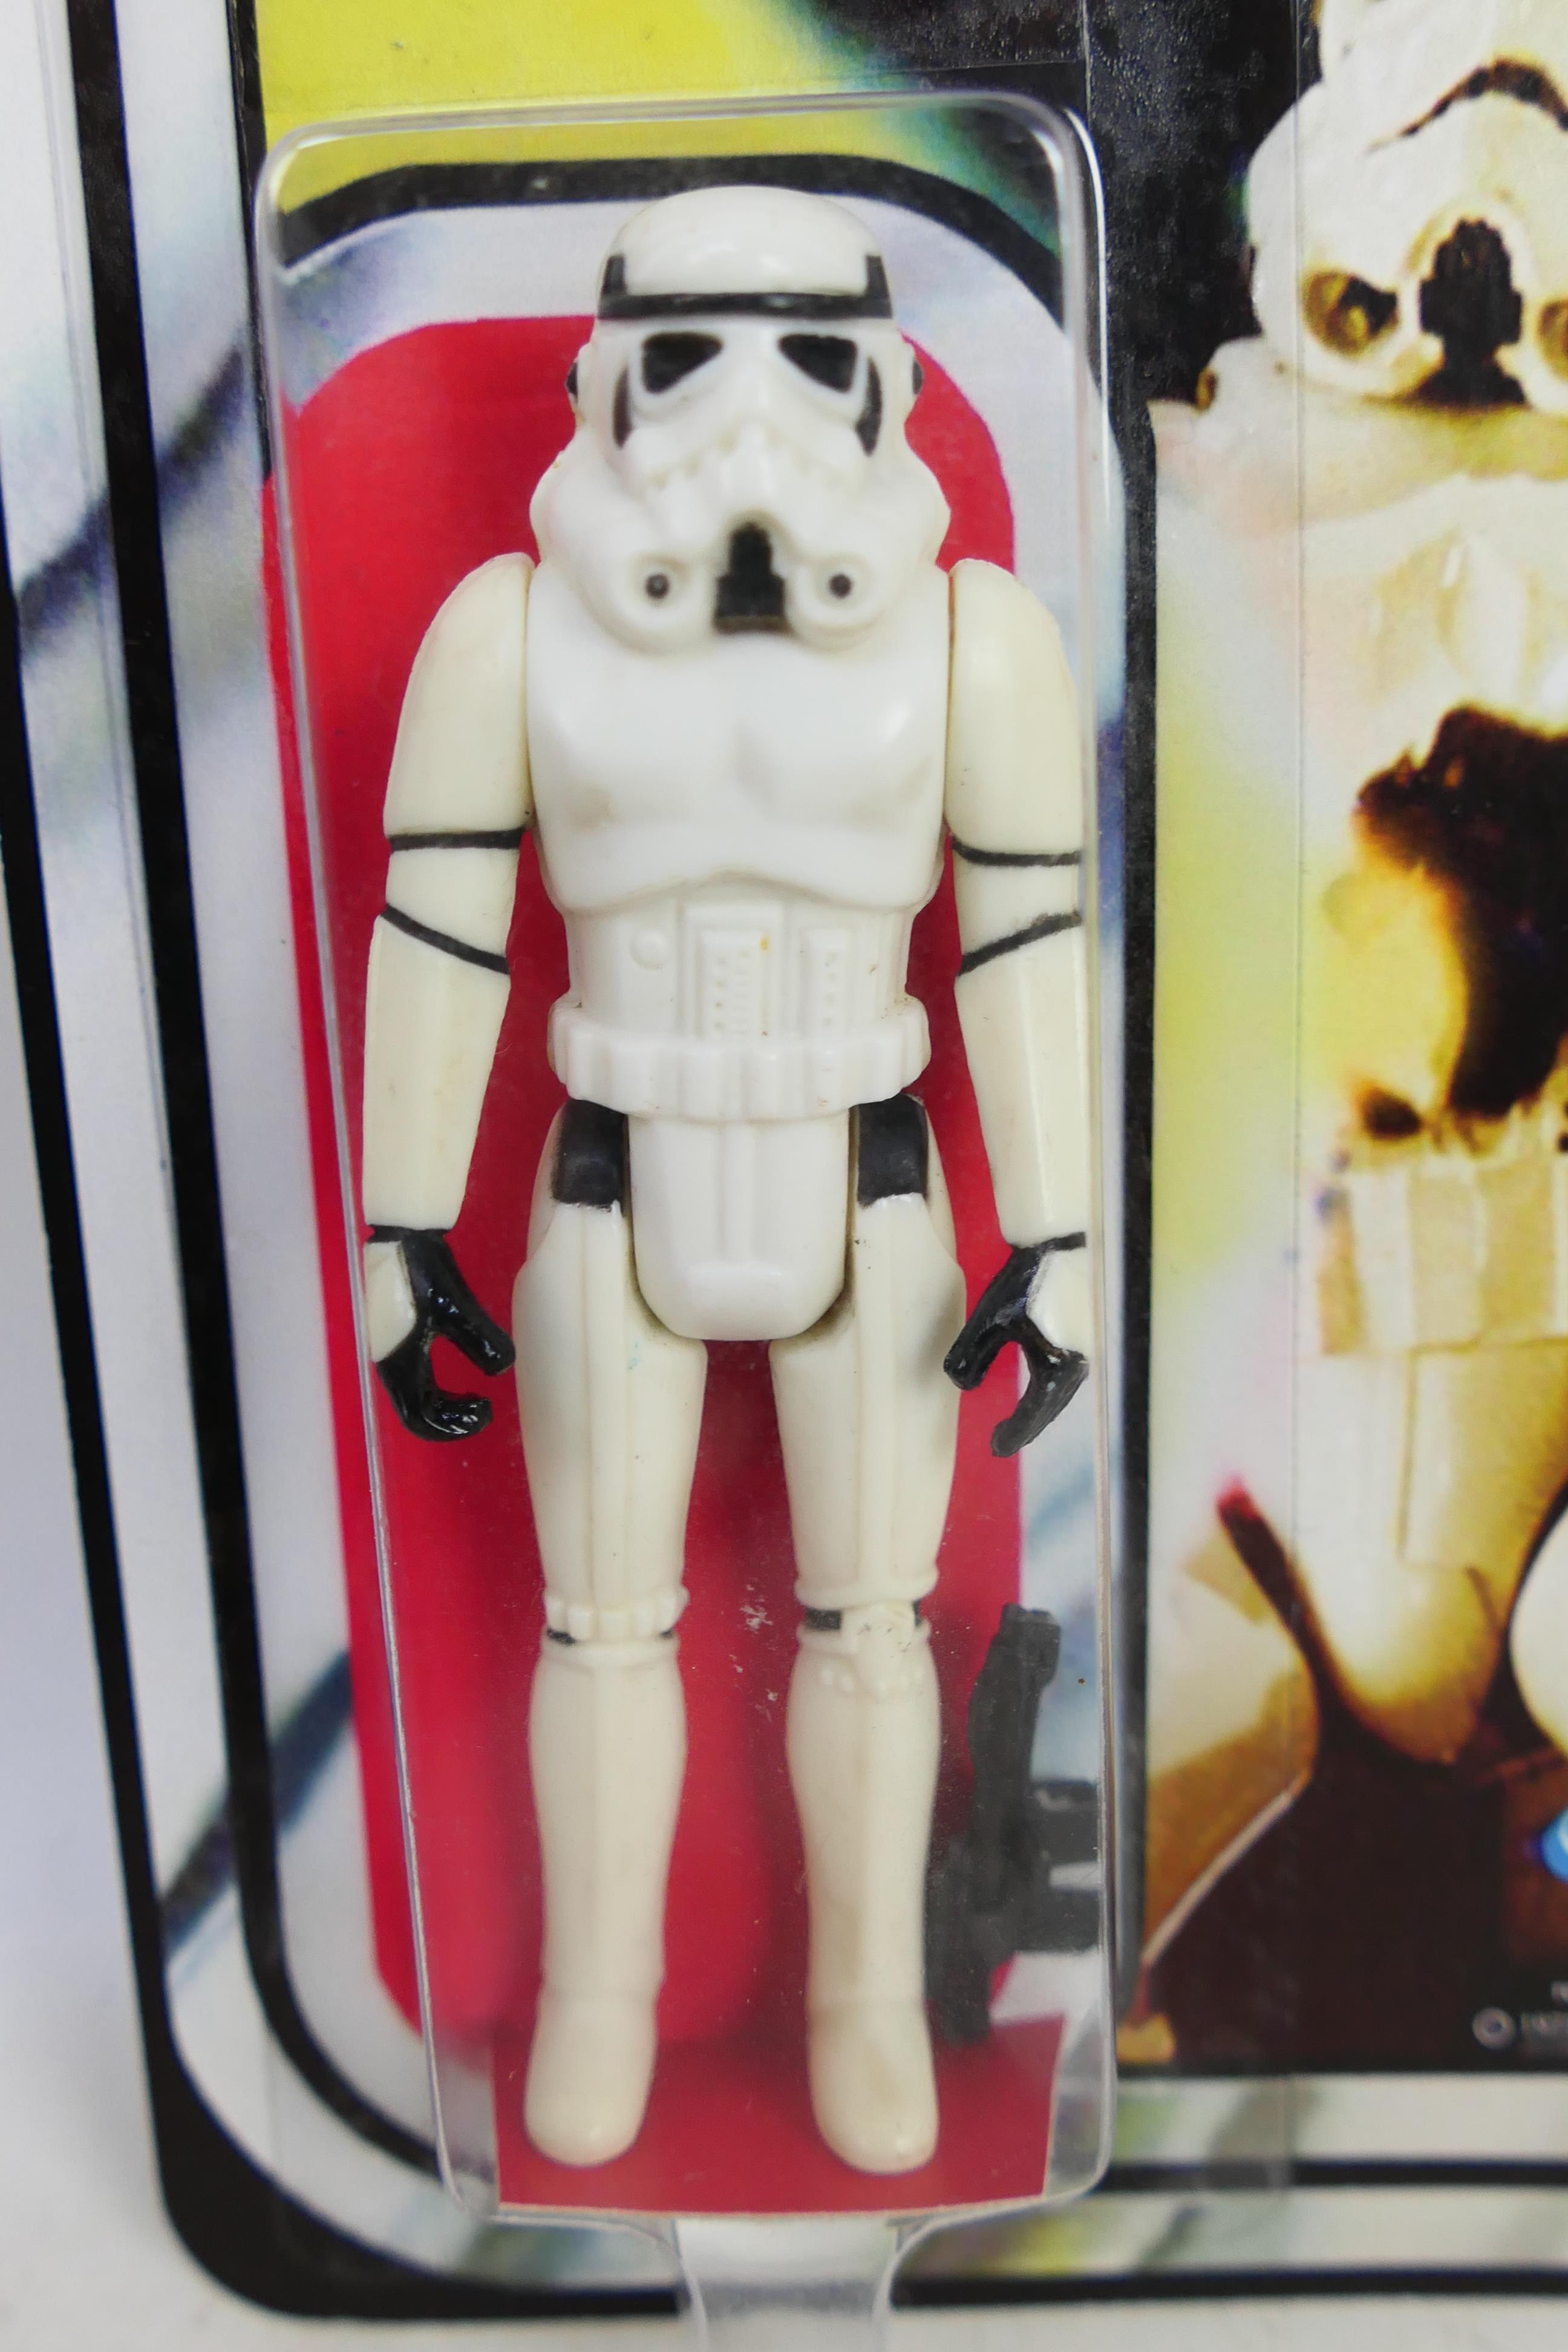 Star Wars - A reproduction MOC Stormtrooper and pistol #38240 (Irregularities seen on clip and - Image 2 of 5